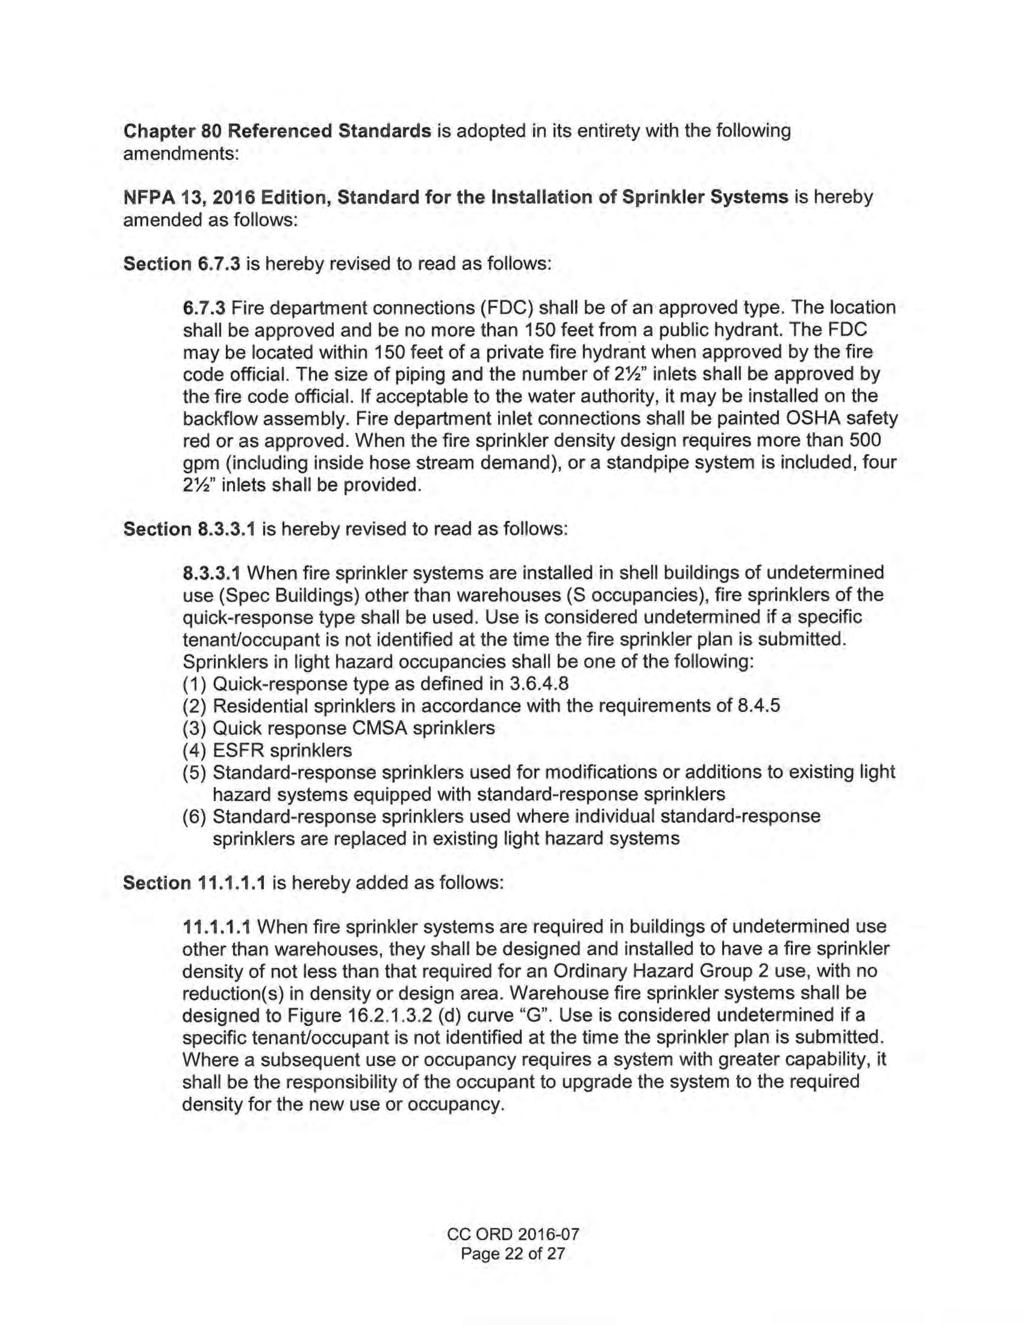 Chapter 80 Referenced Standards is adopted in its entirety with the following amendments: NFPA 13, 2016 Edition, Standard for the Installation of Sprinkler Systems is hereby amended as follows: